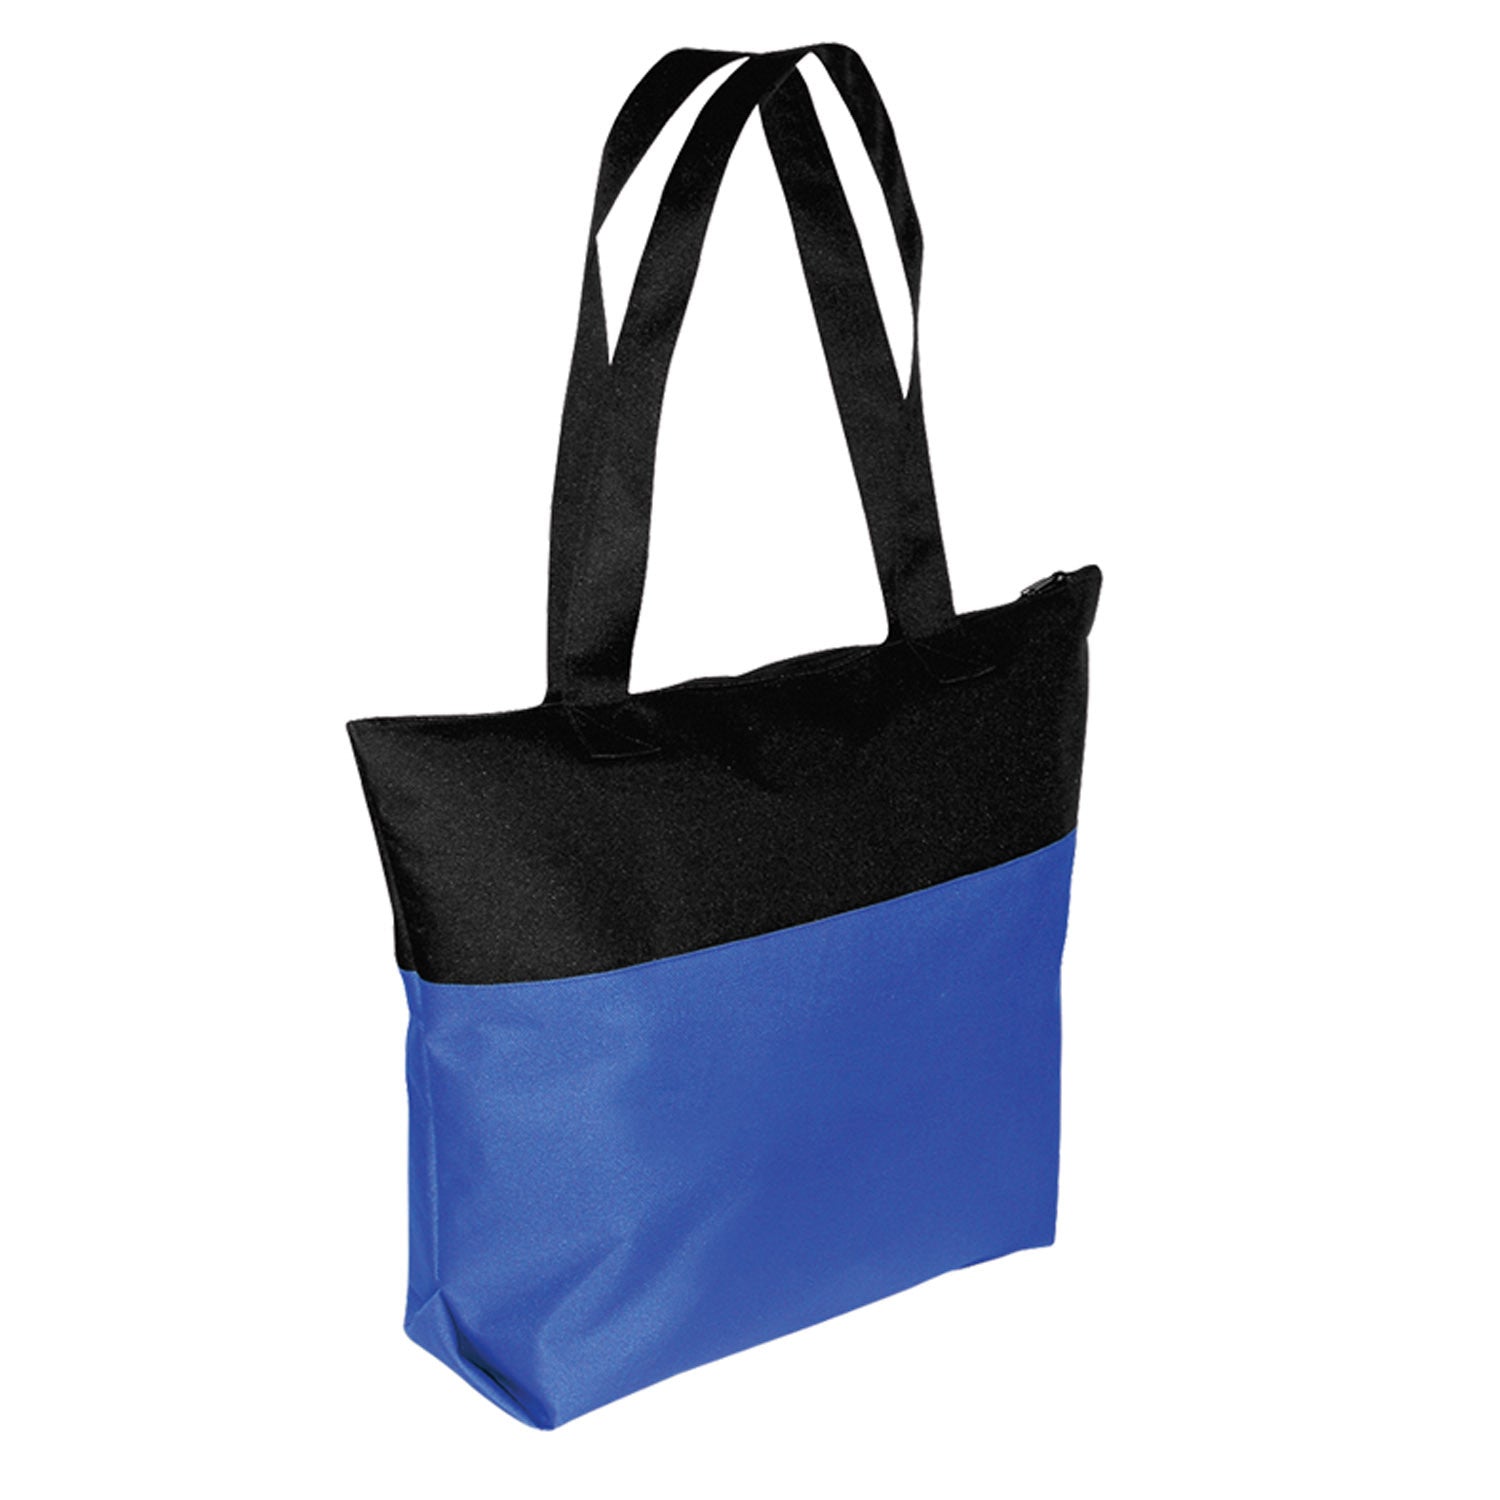 Two Tone Tote Bag with Zip Closure